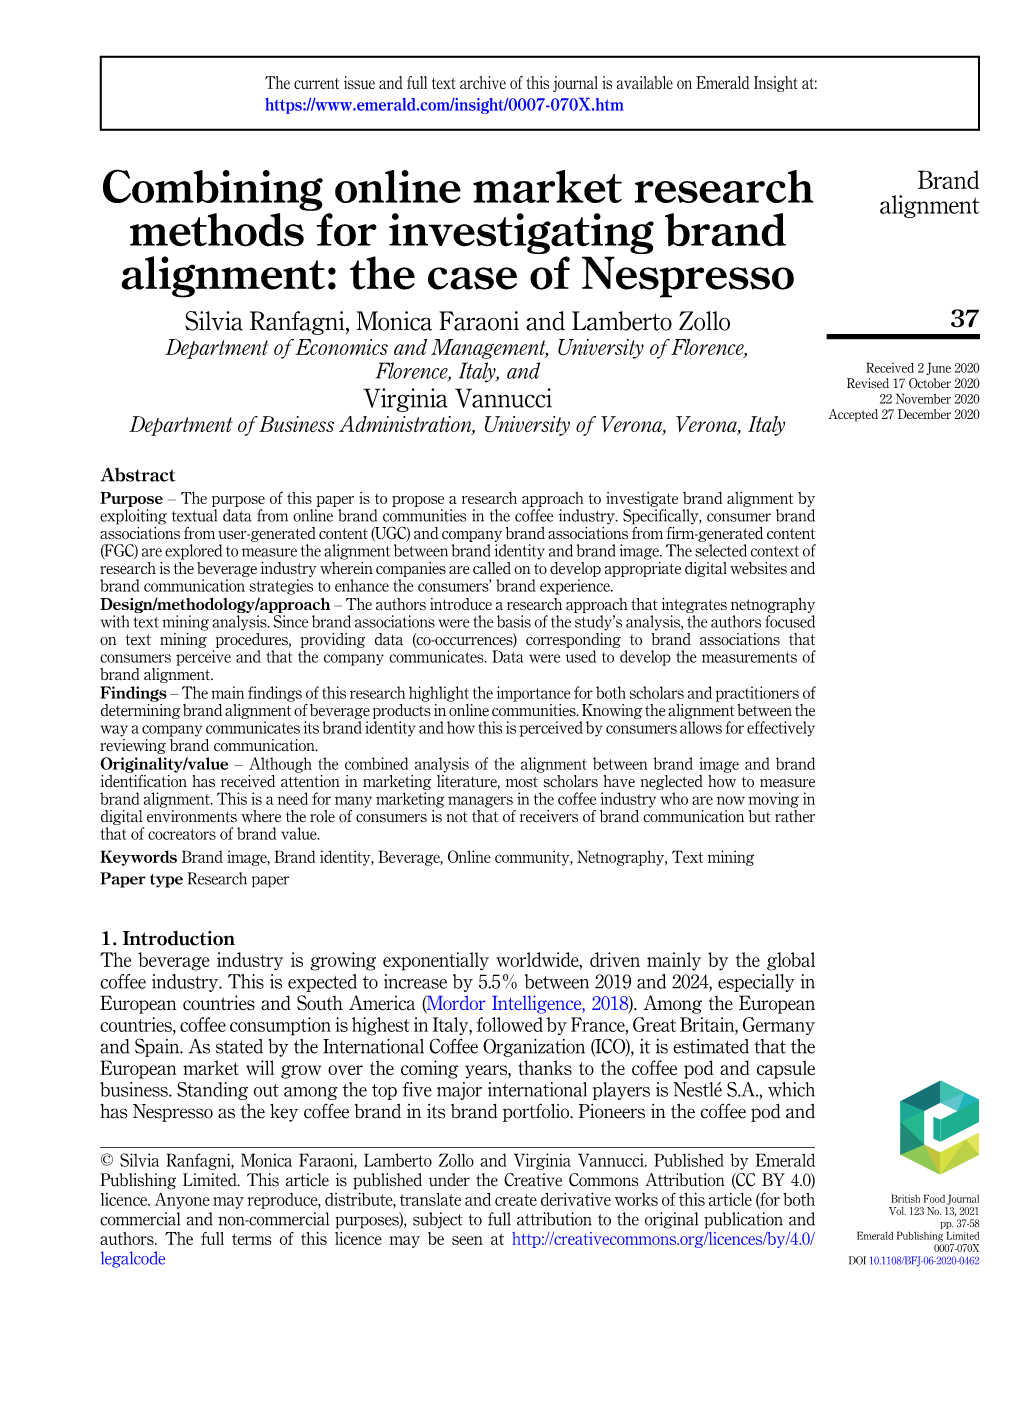 Combining Online Market Research Methods for Investigating Brand